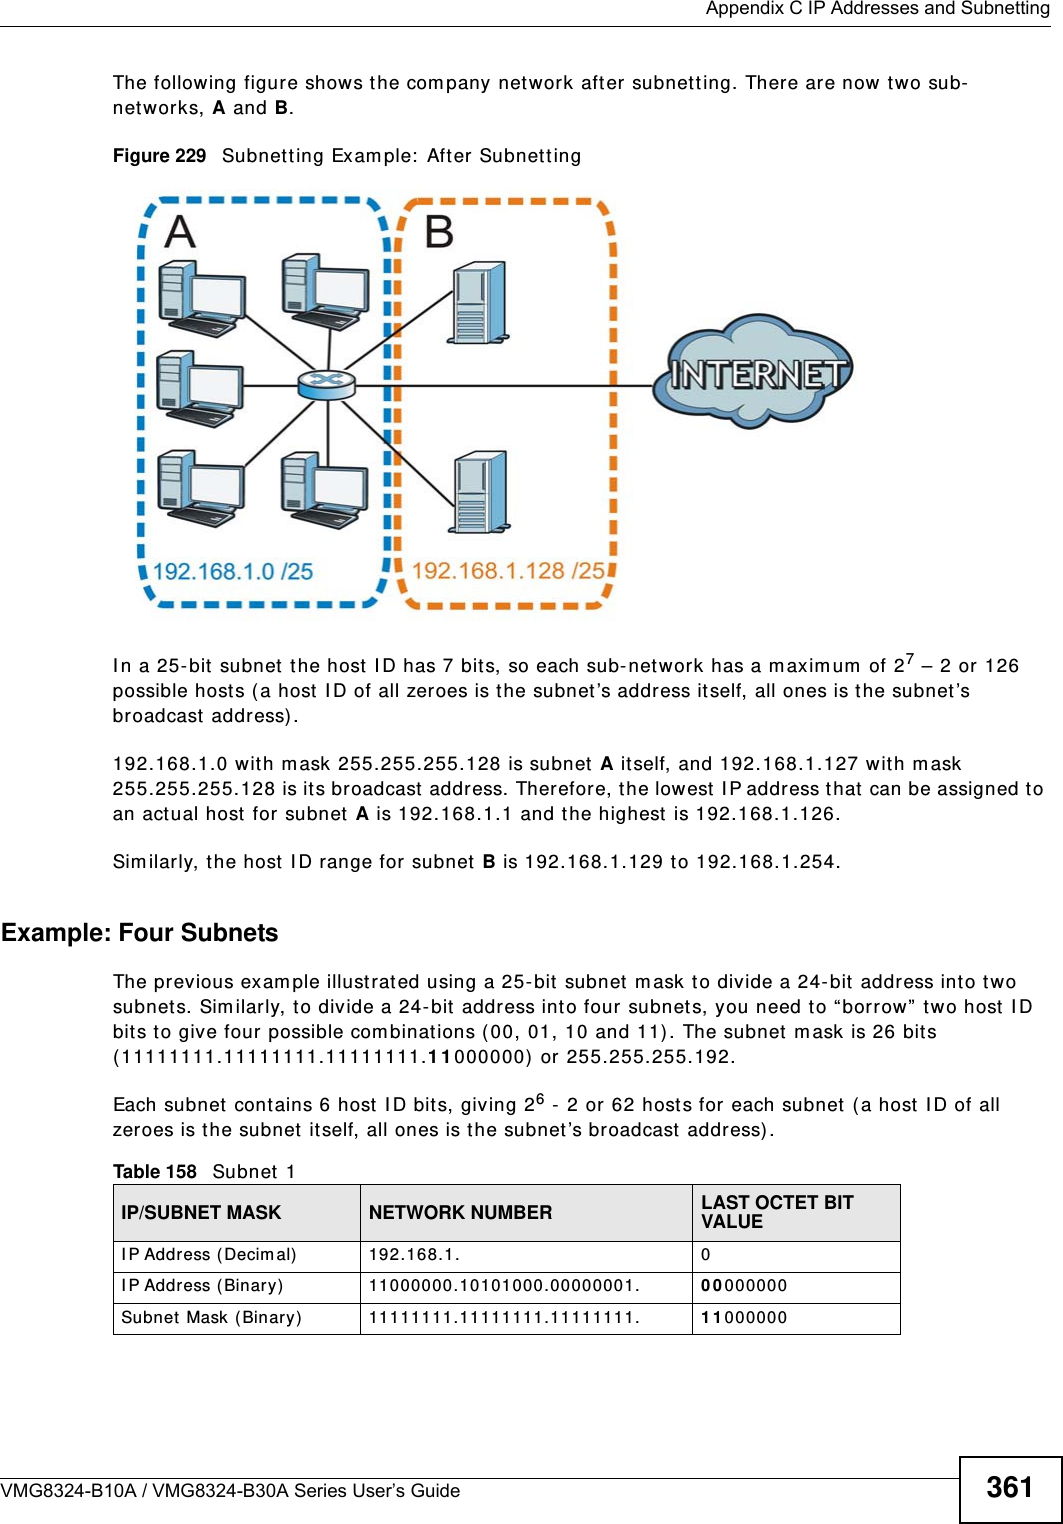  Appendix C IP Addresses and SubnettingVMG8324-B10A / VMG8324-B30A Series User’s Guide 361The following figure shows the com pany network aft er subnett ing. There are now t wo sub-net works, A and B. Figure 229   Subnet ting Exam ple:  Aft er Subnet tingI n a 25- bit  subnet  t he host  I D has 7 bits, so each sub- net work has a maxim um  of 27 – 2 or 126 possible hosts ( a host I D of all zeroes is t he subnet’s address it self, all ones is the subnet ’s broadcast address).192.168.1.0 wit h m ask 255.255.255.128 is subnet  A itself, and 192.168.1.127 wit h m ask 255.255.255.128 is its br oadcast address. Therefore, the low est I P address t hat  can be assigned t o an act ual host  for subnet A is 192.168.1.1 and t he highest  is 192.168.1.126. Sim ilar ly, the host I D range for subnet B is 192.168.1.129 t o 192.168.1.254.Example: Four Subnets The previous exam ple illustrated using a 25- bit  subnet  m ask t o divide a 24- bit  address int o two subnet s. Sim ilarly, to divide a 24- bit  address int o four subnet s, you need t o “ borrow” two host I D bits to give four possible com binat ions (00, 01, 10 and 11) . The subnet m ask is 26 bit s (11111111.11111111.11111111.1 1 000000) or 255.255.255.192. Each subnet  cont ains 6 host  I D bit s, giving 26 -  2 or 62 host s for each subnet (a host  I D of all zeroes is the subnet  itself, all ones is the subnet’s broadcast address) . Table 158   Subnet 1IP/SUBNET MASK NETWORK NUMBER LAST OCTET BIT VALUEI P Address ( Decim al) 192.168.1. 0I P Address ( Binary) 11000000.10101000.00000001. 0 0 000000Subnet Mask (Binary) 11111111.11111111.11111111. 1 1 000000